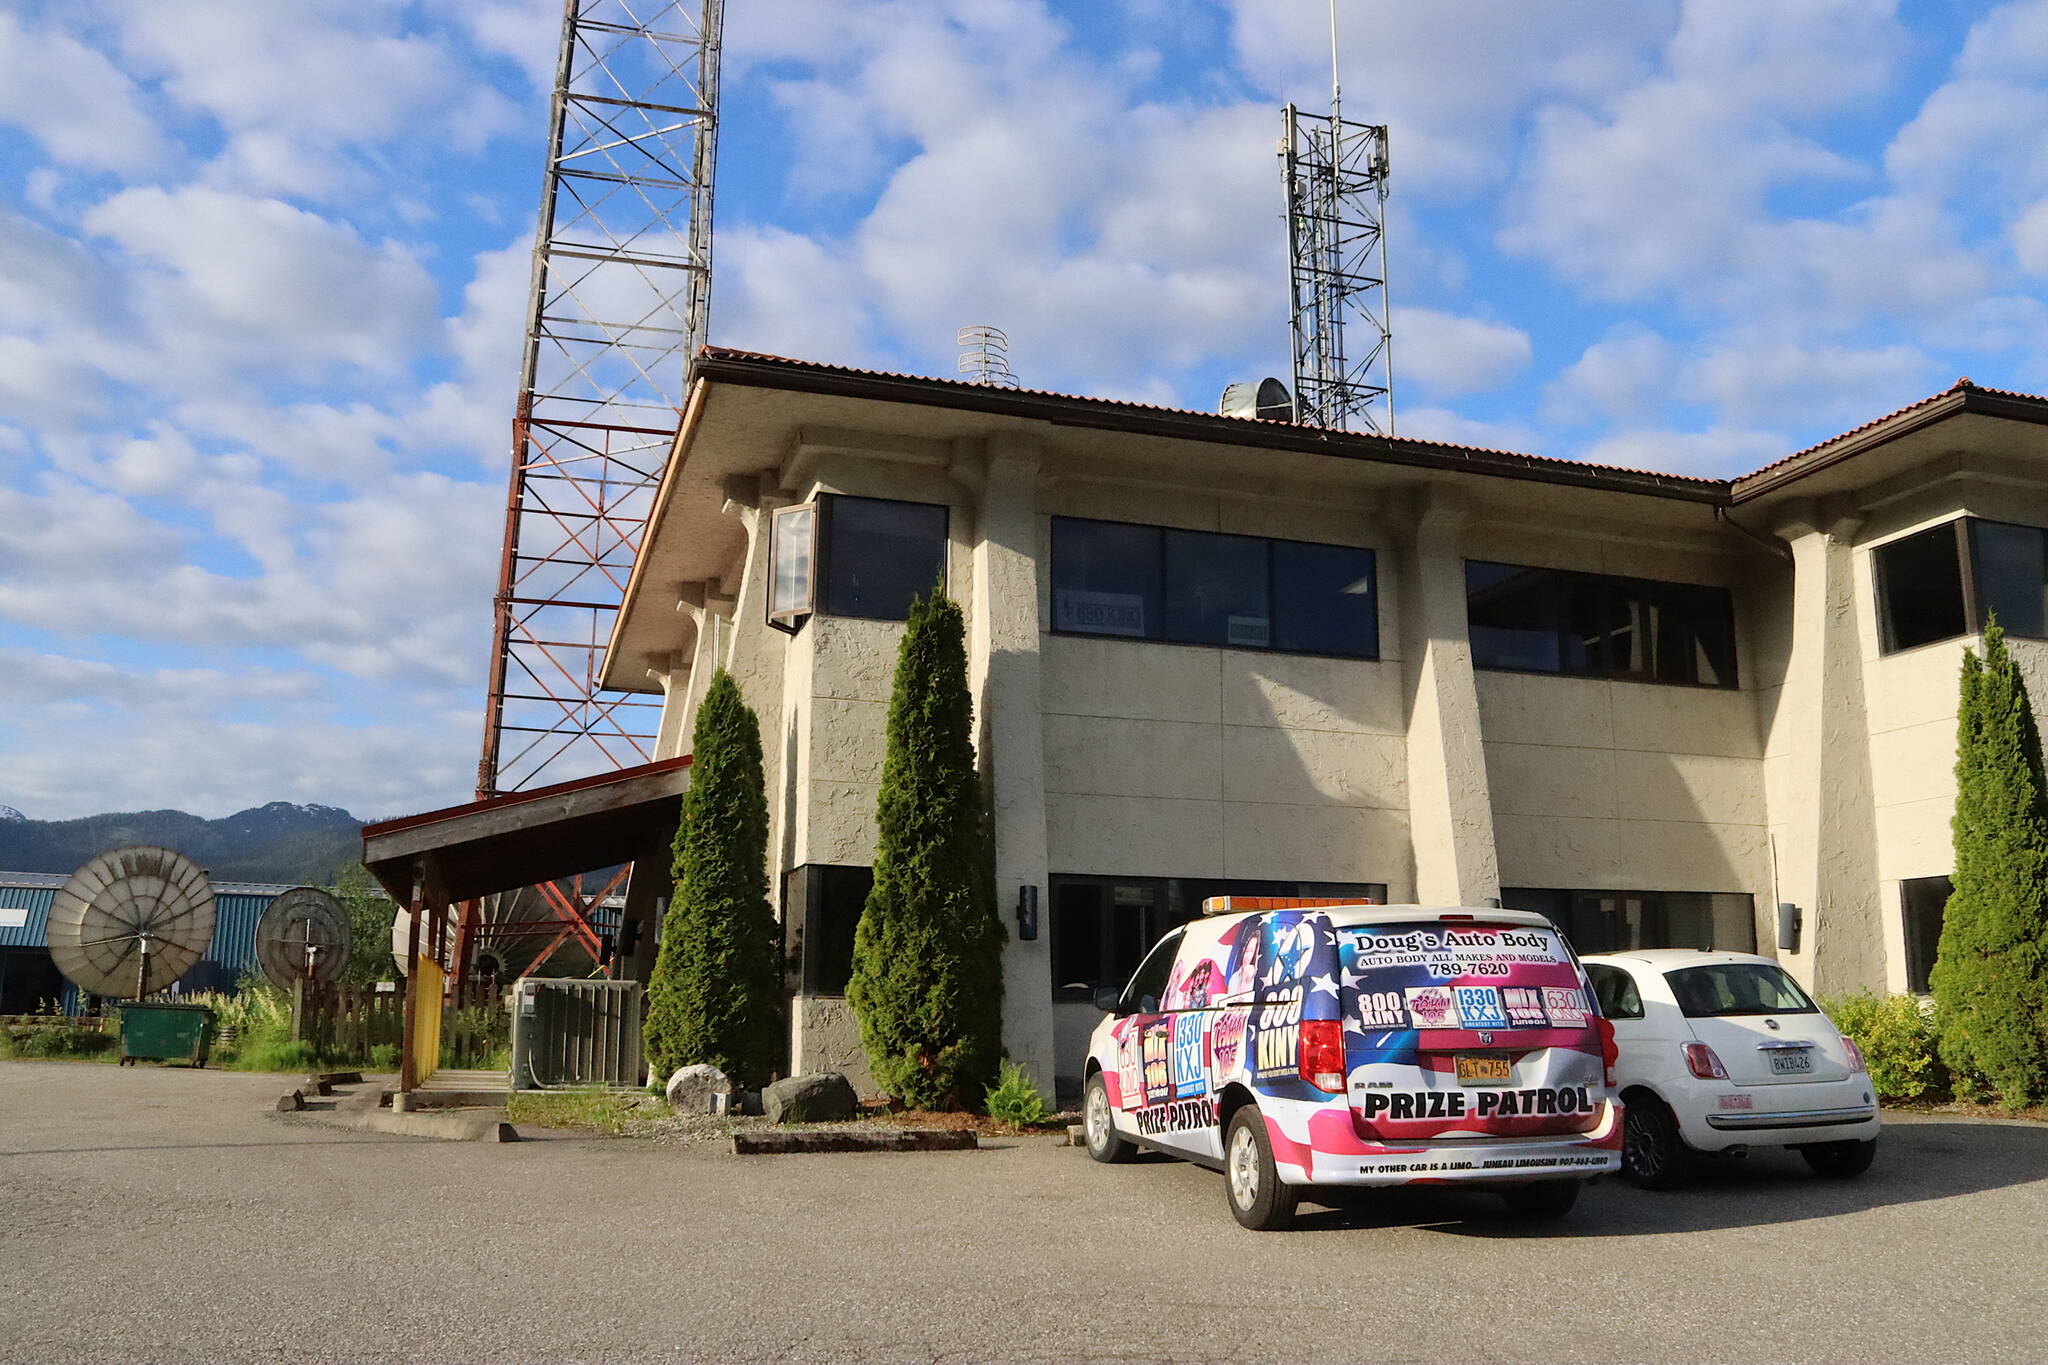 KINY’s “prize patrol” vehicle is parked outside the Local First Media Group Inc.’s building on Wednesday morning. (Mark Sabbatini / Juneau Empire)